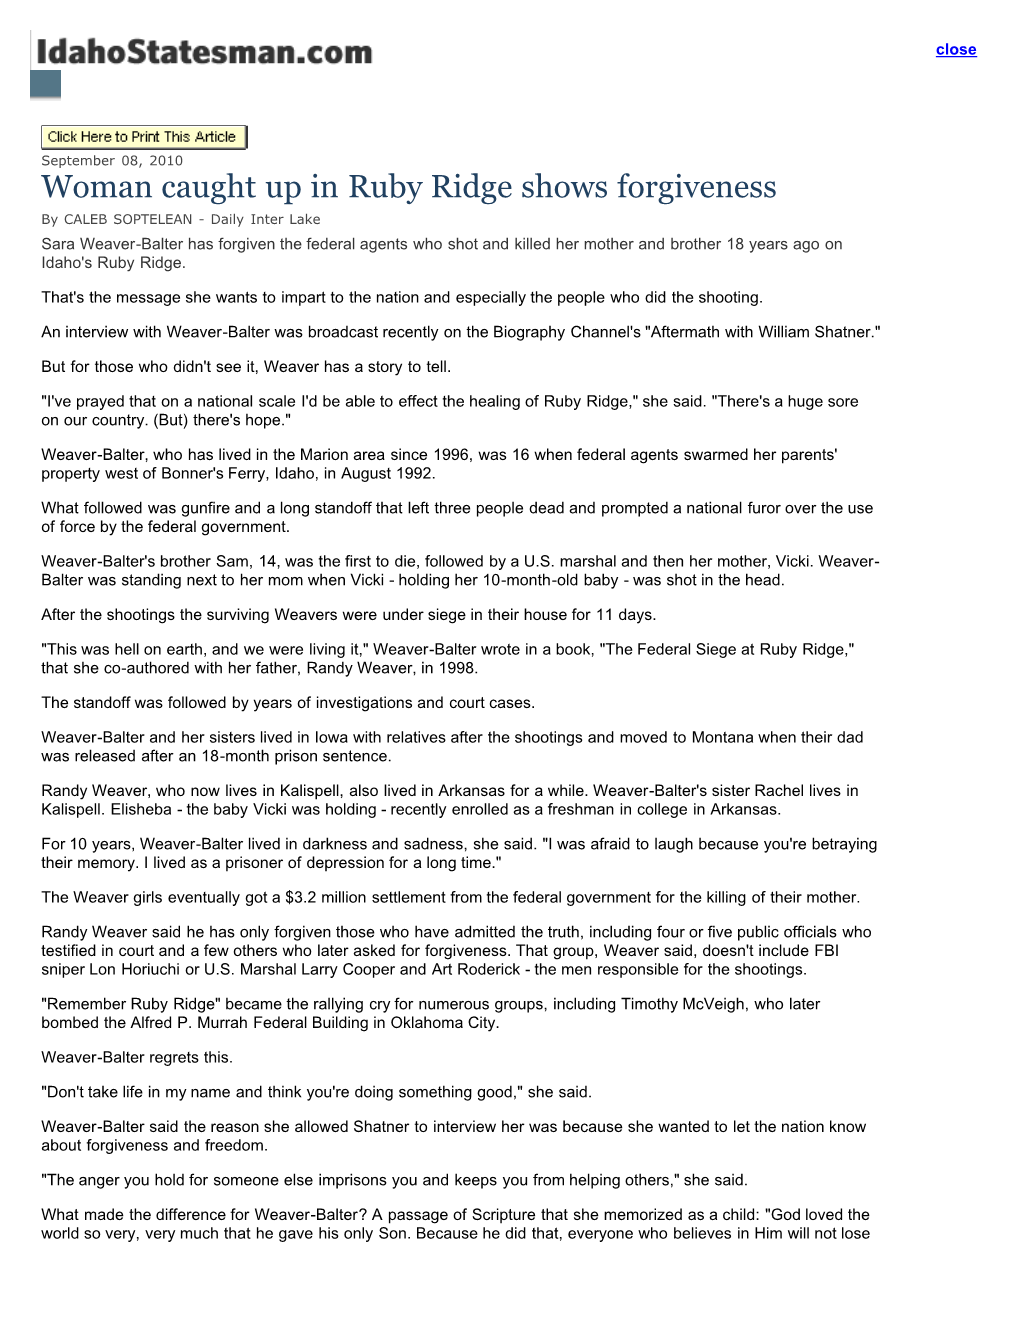 Woman Caught up in Ruby Ridge Shows Forgiveness